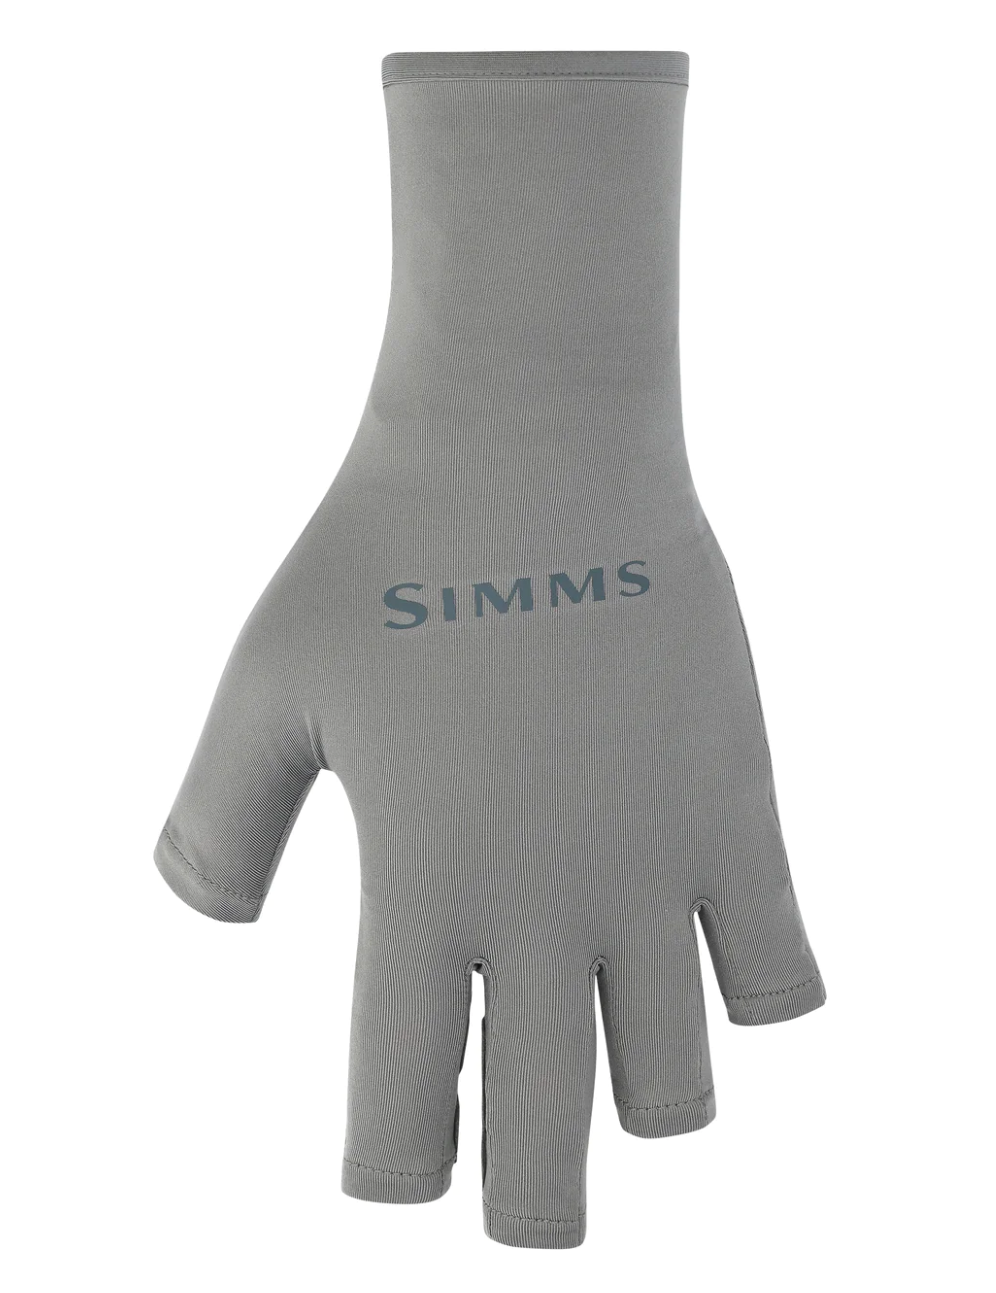 Simms Solarflex Bugstopper Sunglove, Bugstopper Fly Fishing Gloves, Available Online At The Fly Fishers